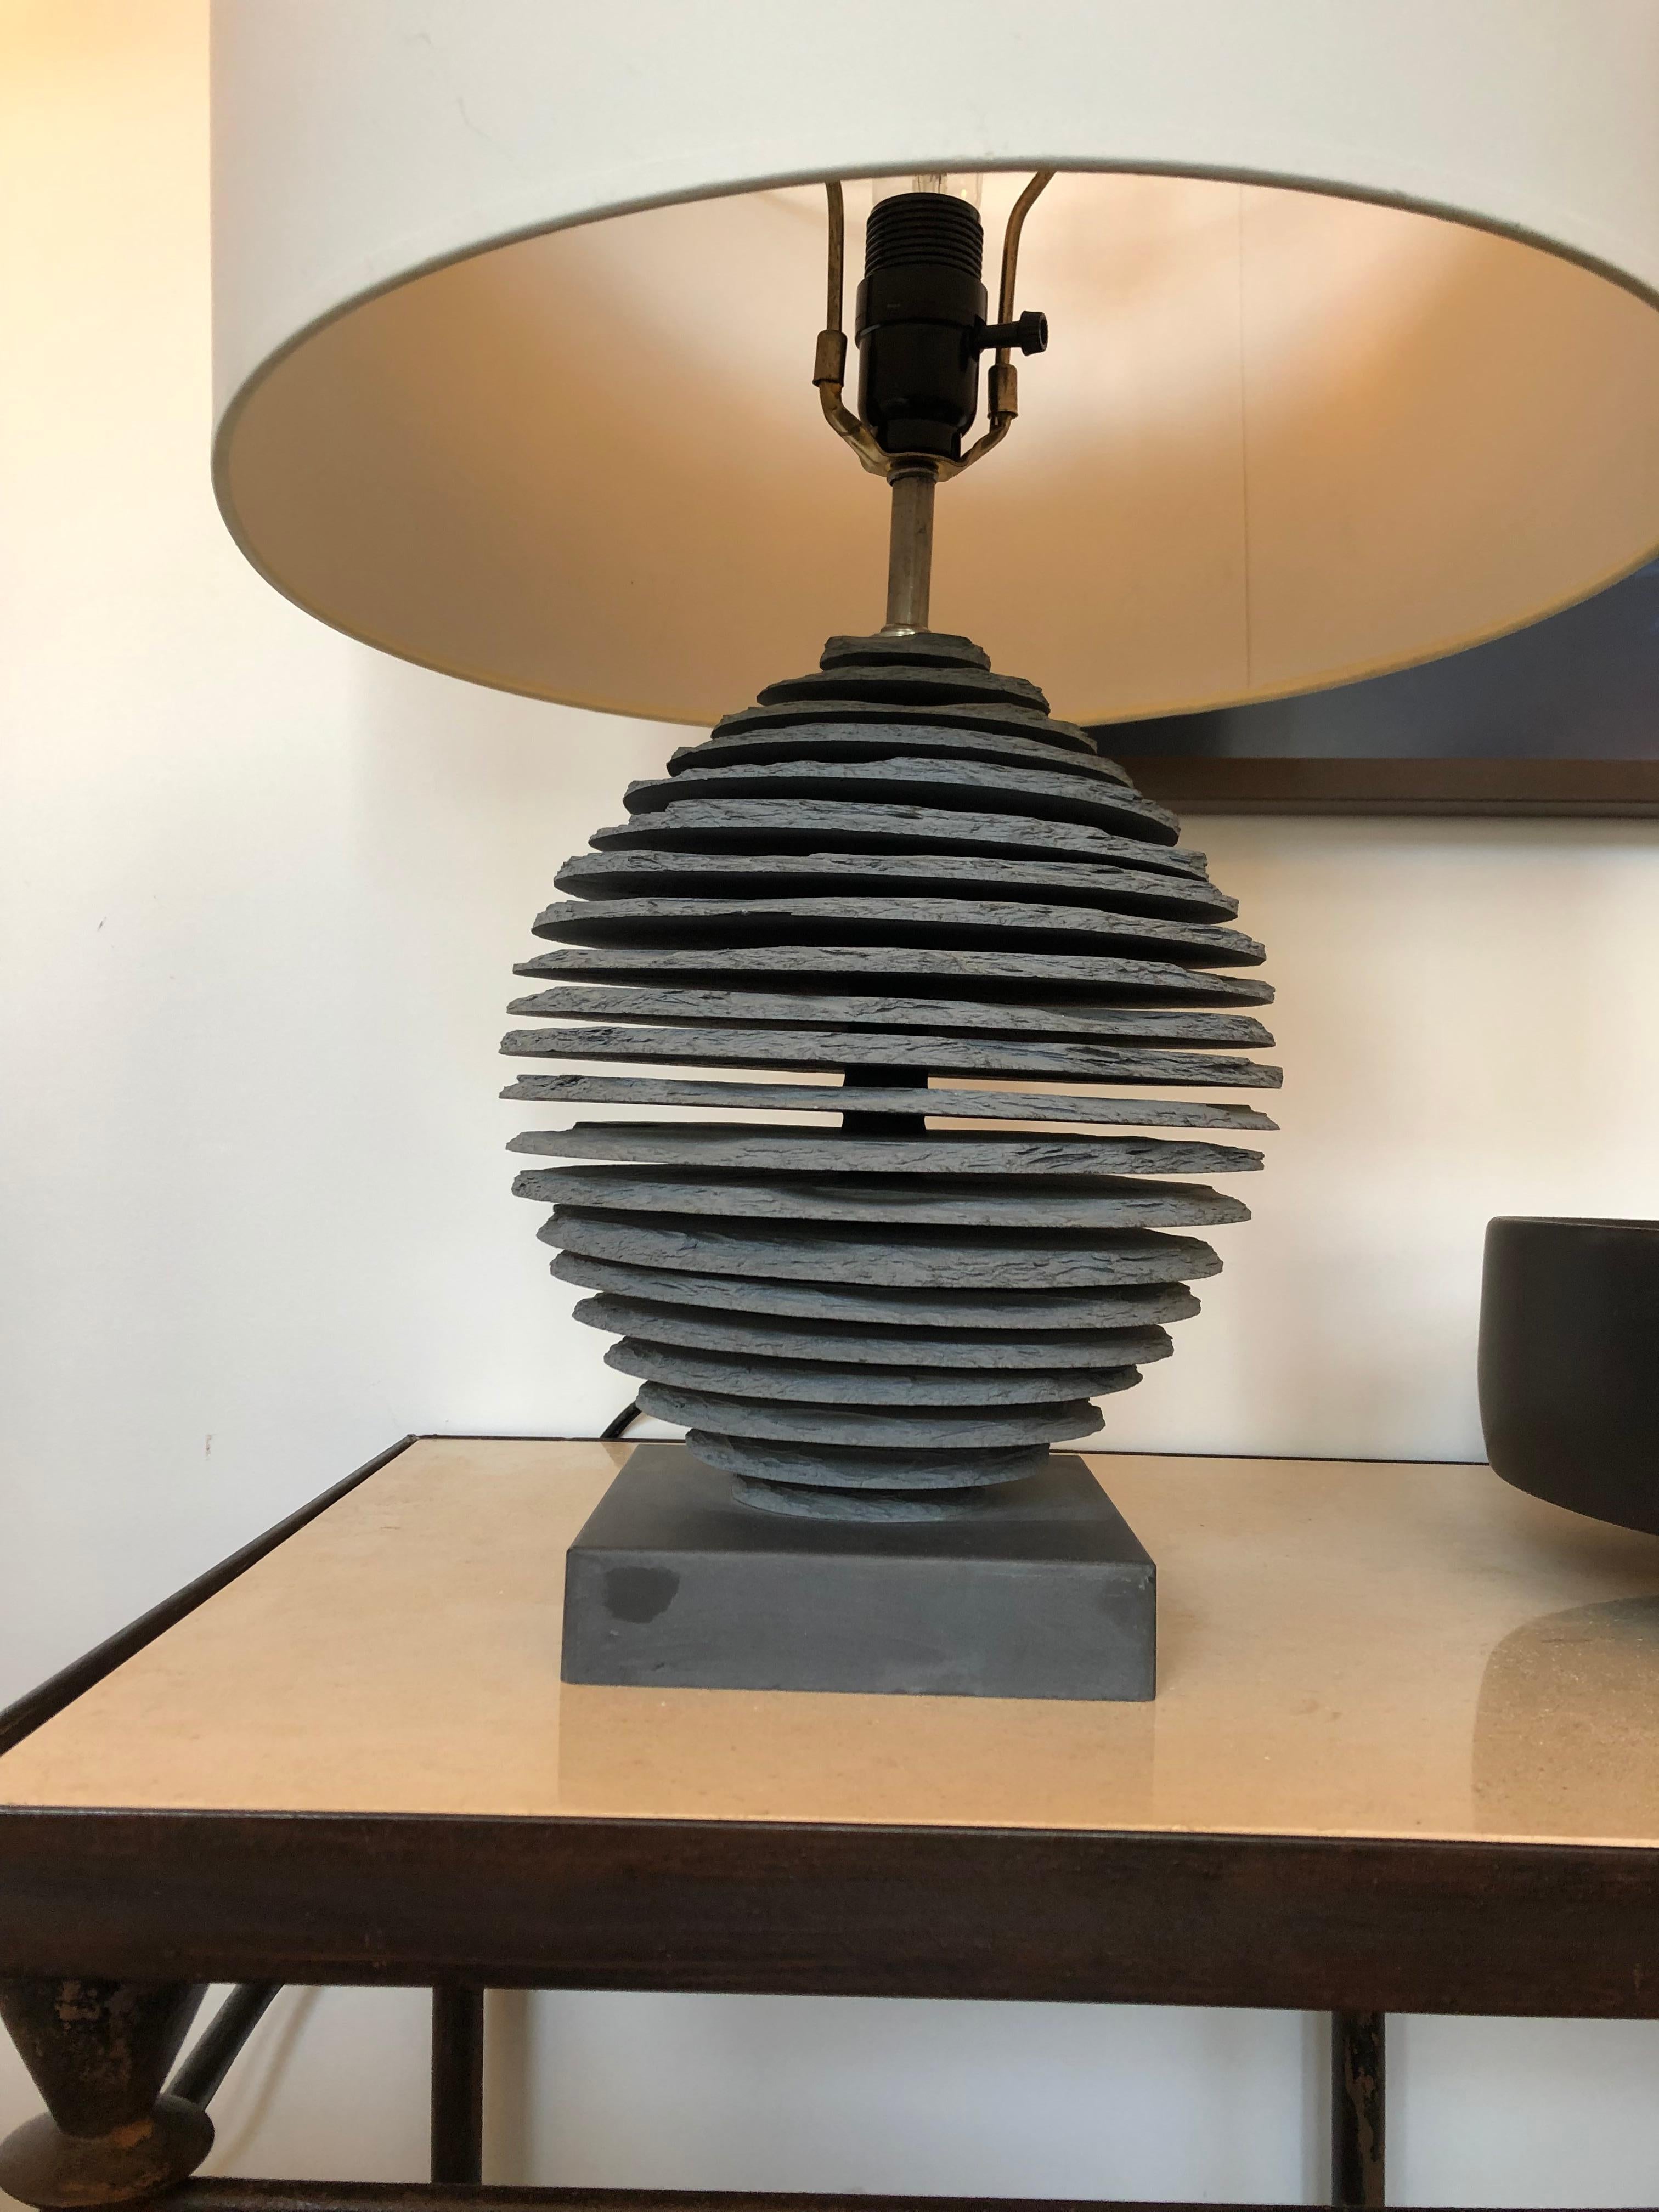 The lamp base is handcrafted with multiple individually carved sections of blue stone slate, then with mathematical precision is hand layered in horizontal parallel sections leaving space between each section creating an optic see through illusion.